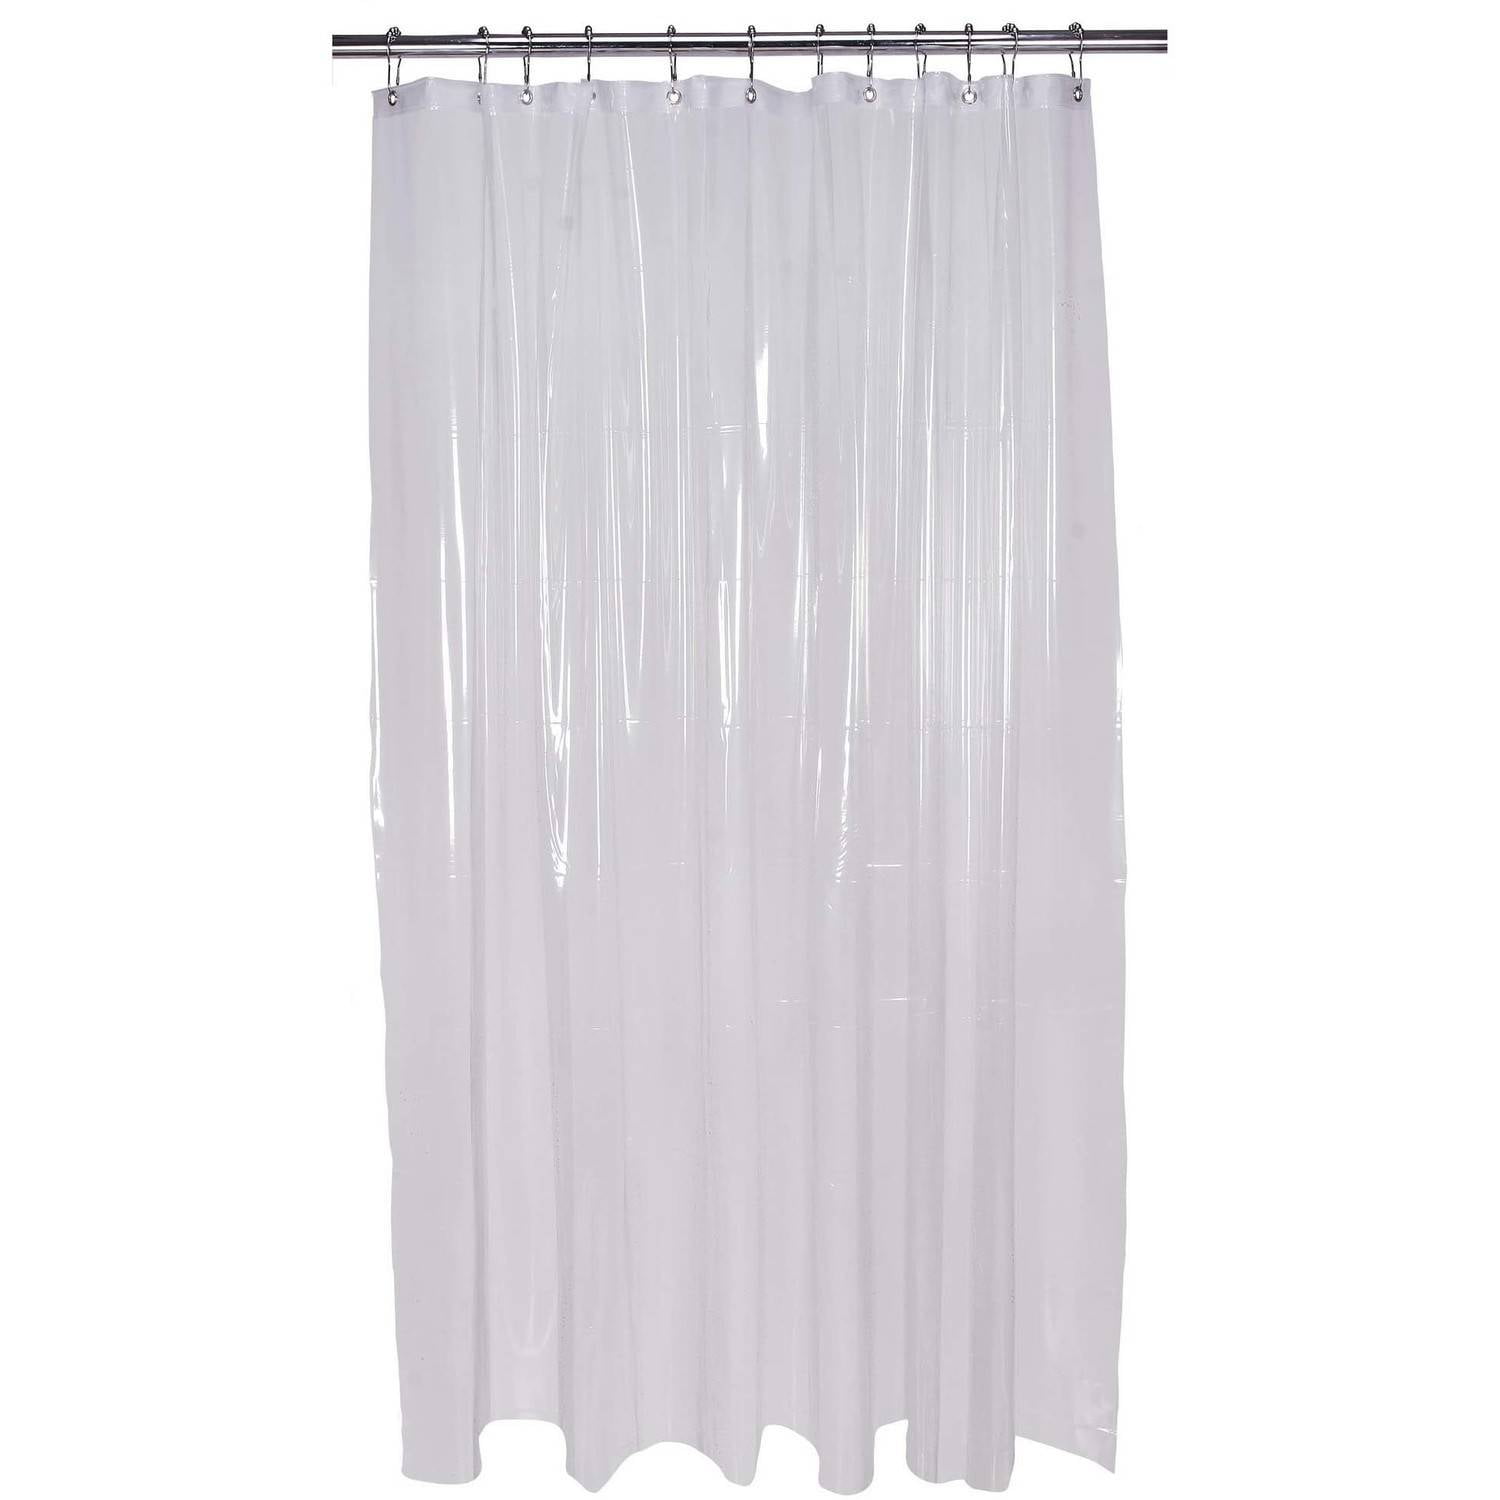 Bath Bliss Extra Long Shower Curtain, 108 Wide Shower Curtain Liner